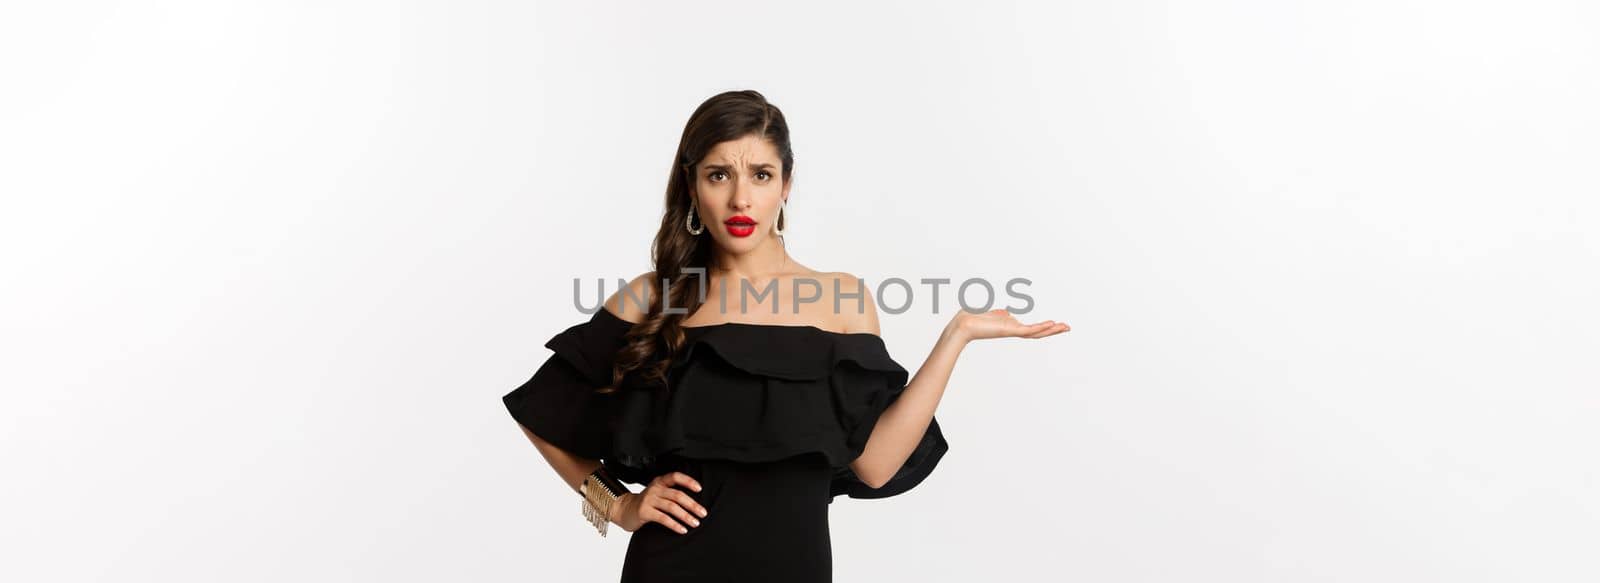 Fashion and beauty. Annoyed woman in black dress raising hand, so what gesture, looking confused at camera, standing bothered over white background.